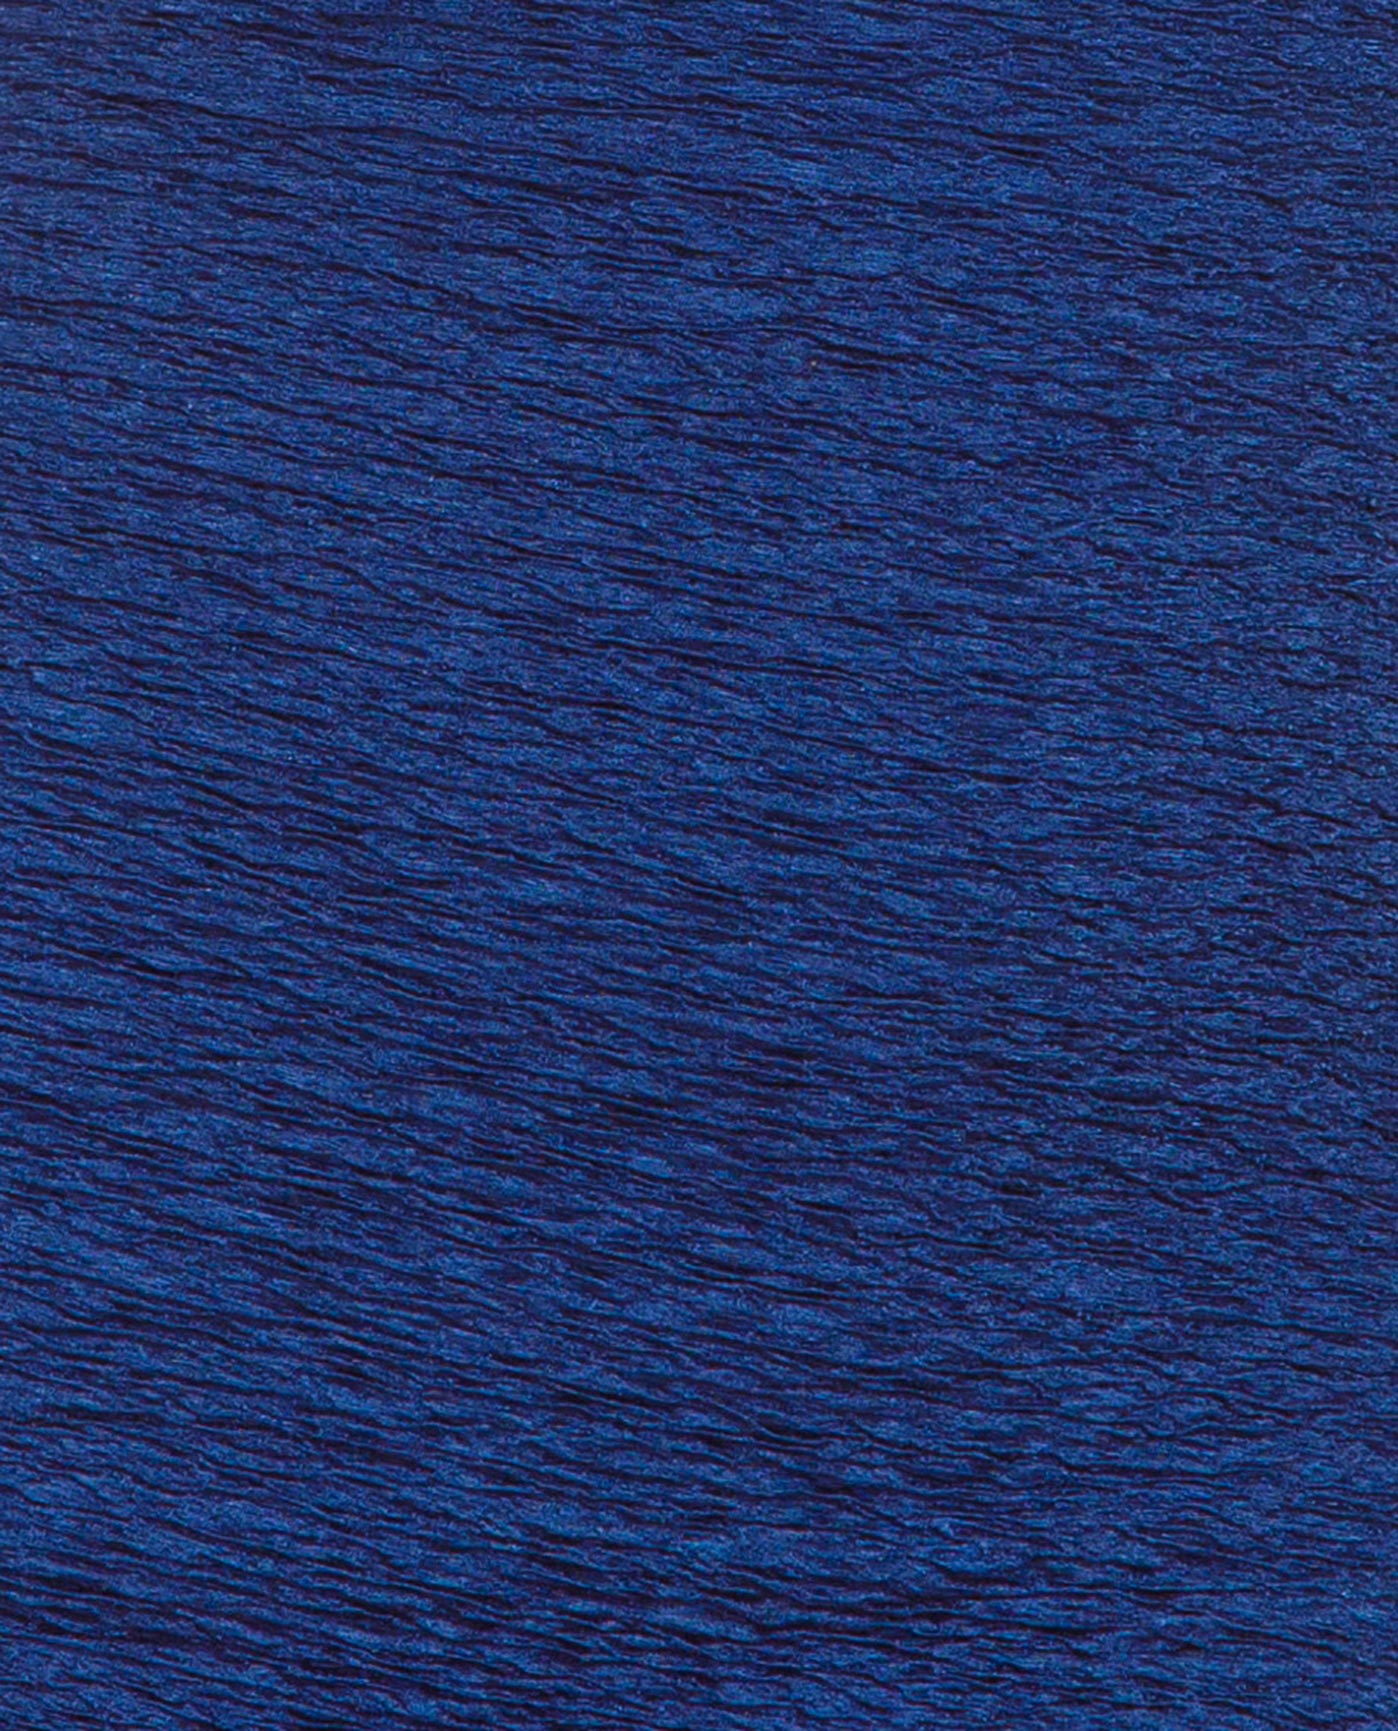 FABRIC SWATCH VIEW OF CHLORINE RESISTANT KRINKLE TEXTURED SOLID ACTIVE BACK ONE PIECE | KRINKLE NAVY